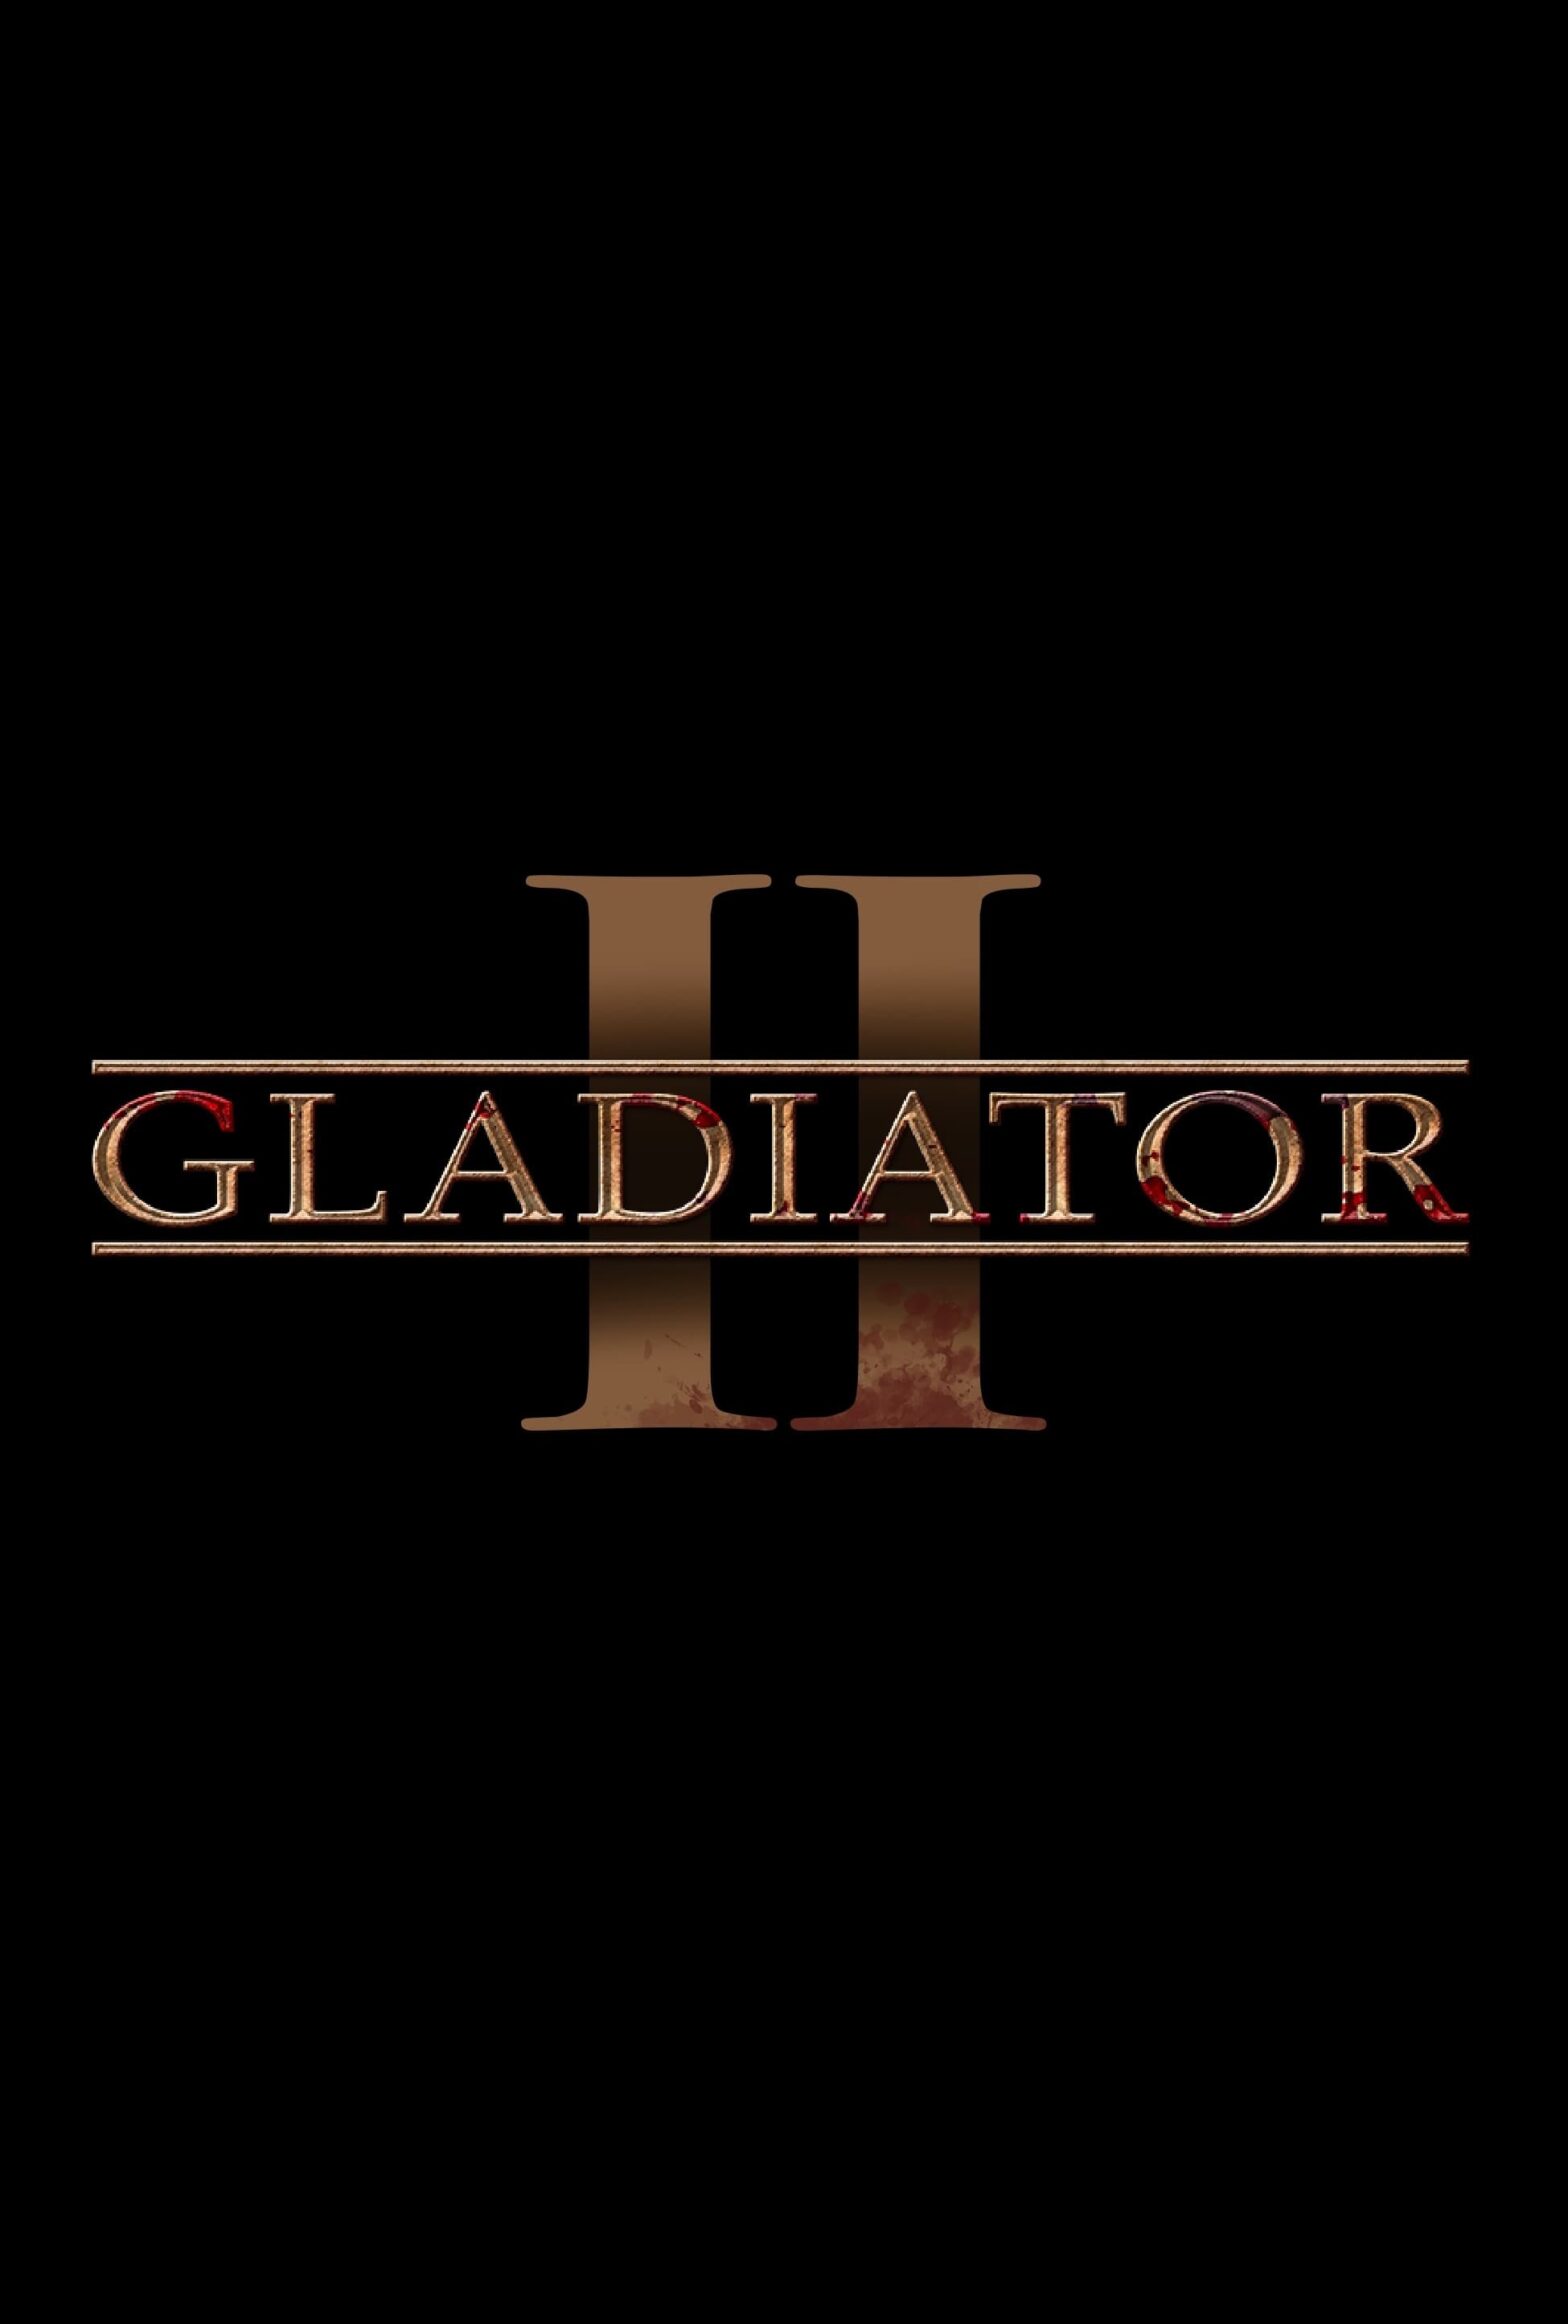 Poster for the movie "Untitled Gladiator Sequel"